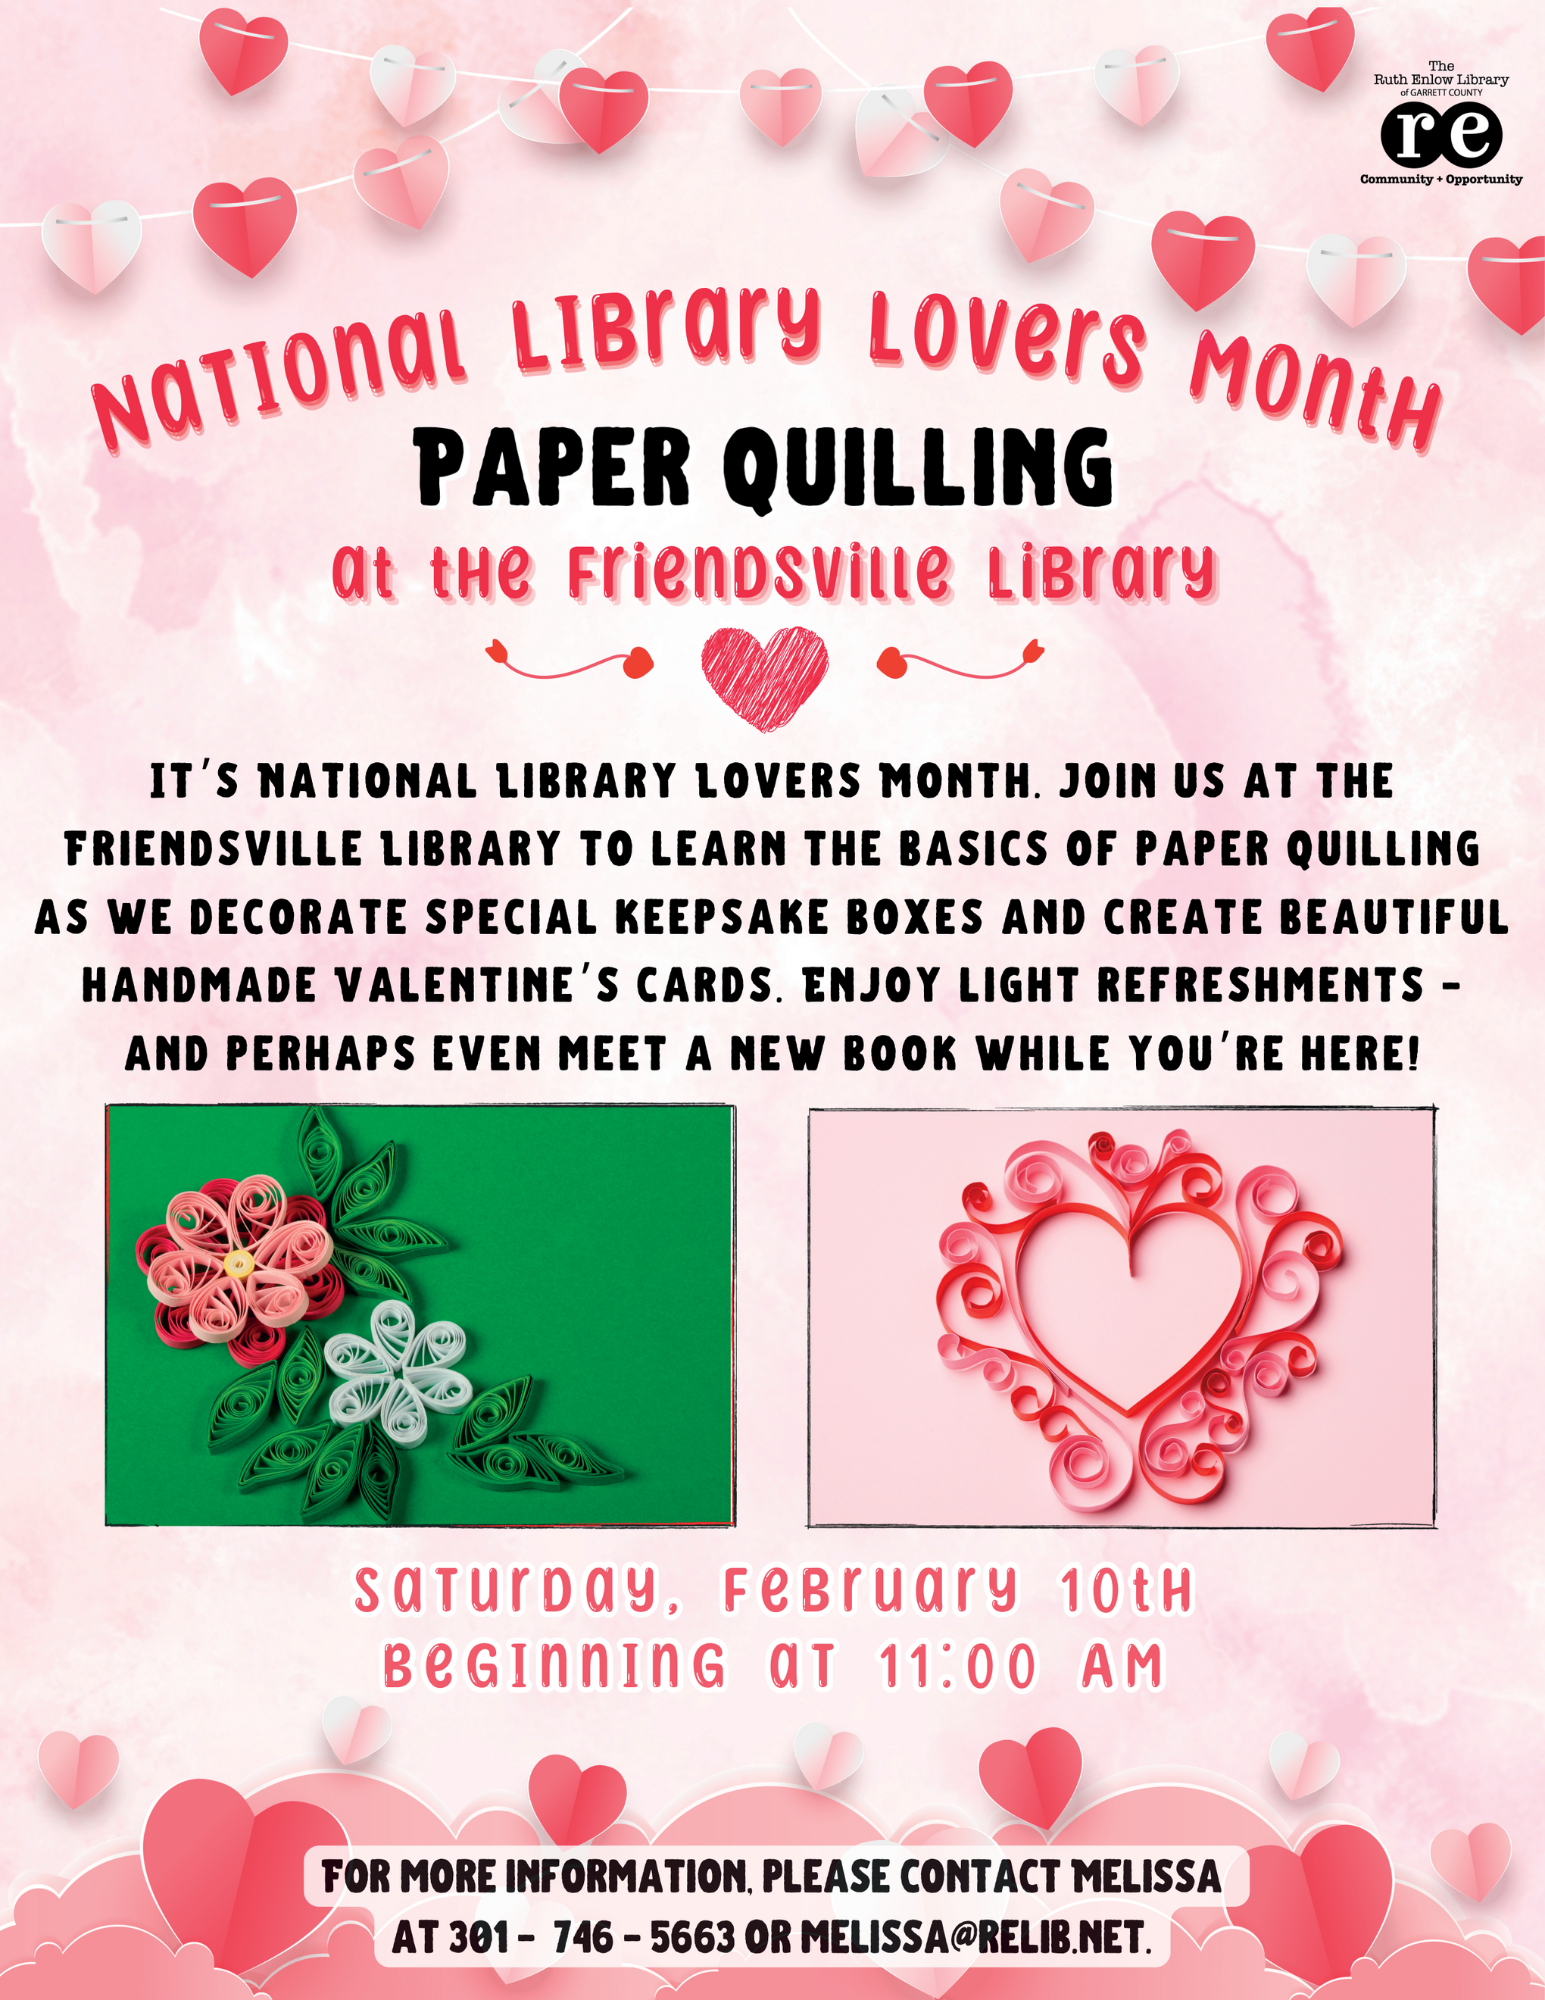 Flyer featuring paper quilled flowers and hearts along with details about a paper quilling event.